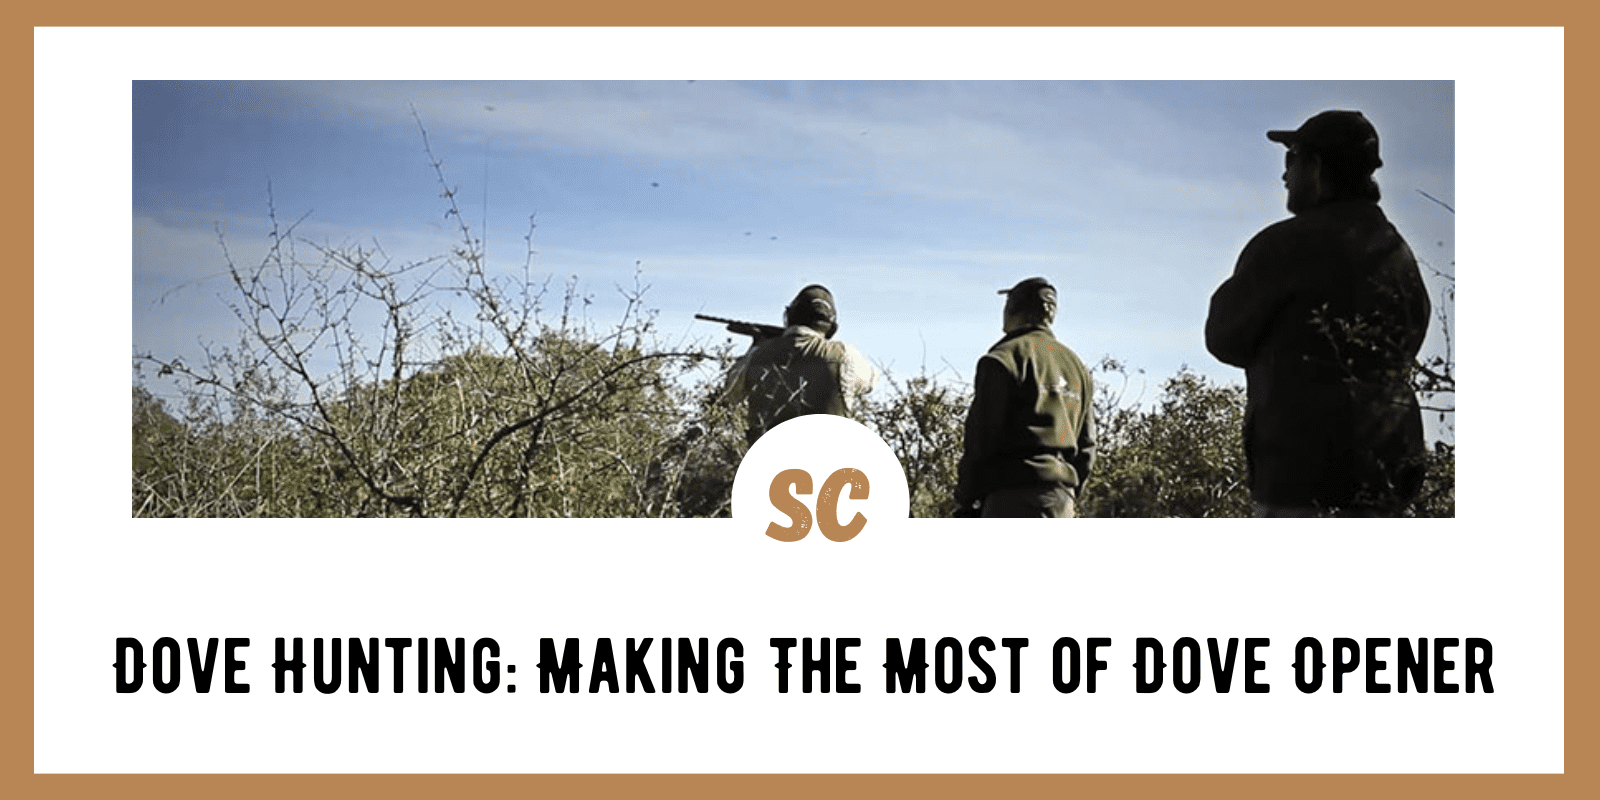 Dove Hunting: Making The Most of Dove Opener